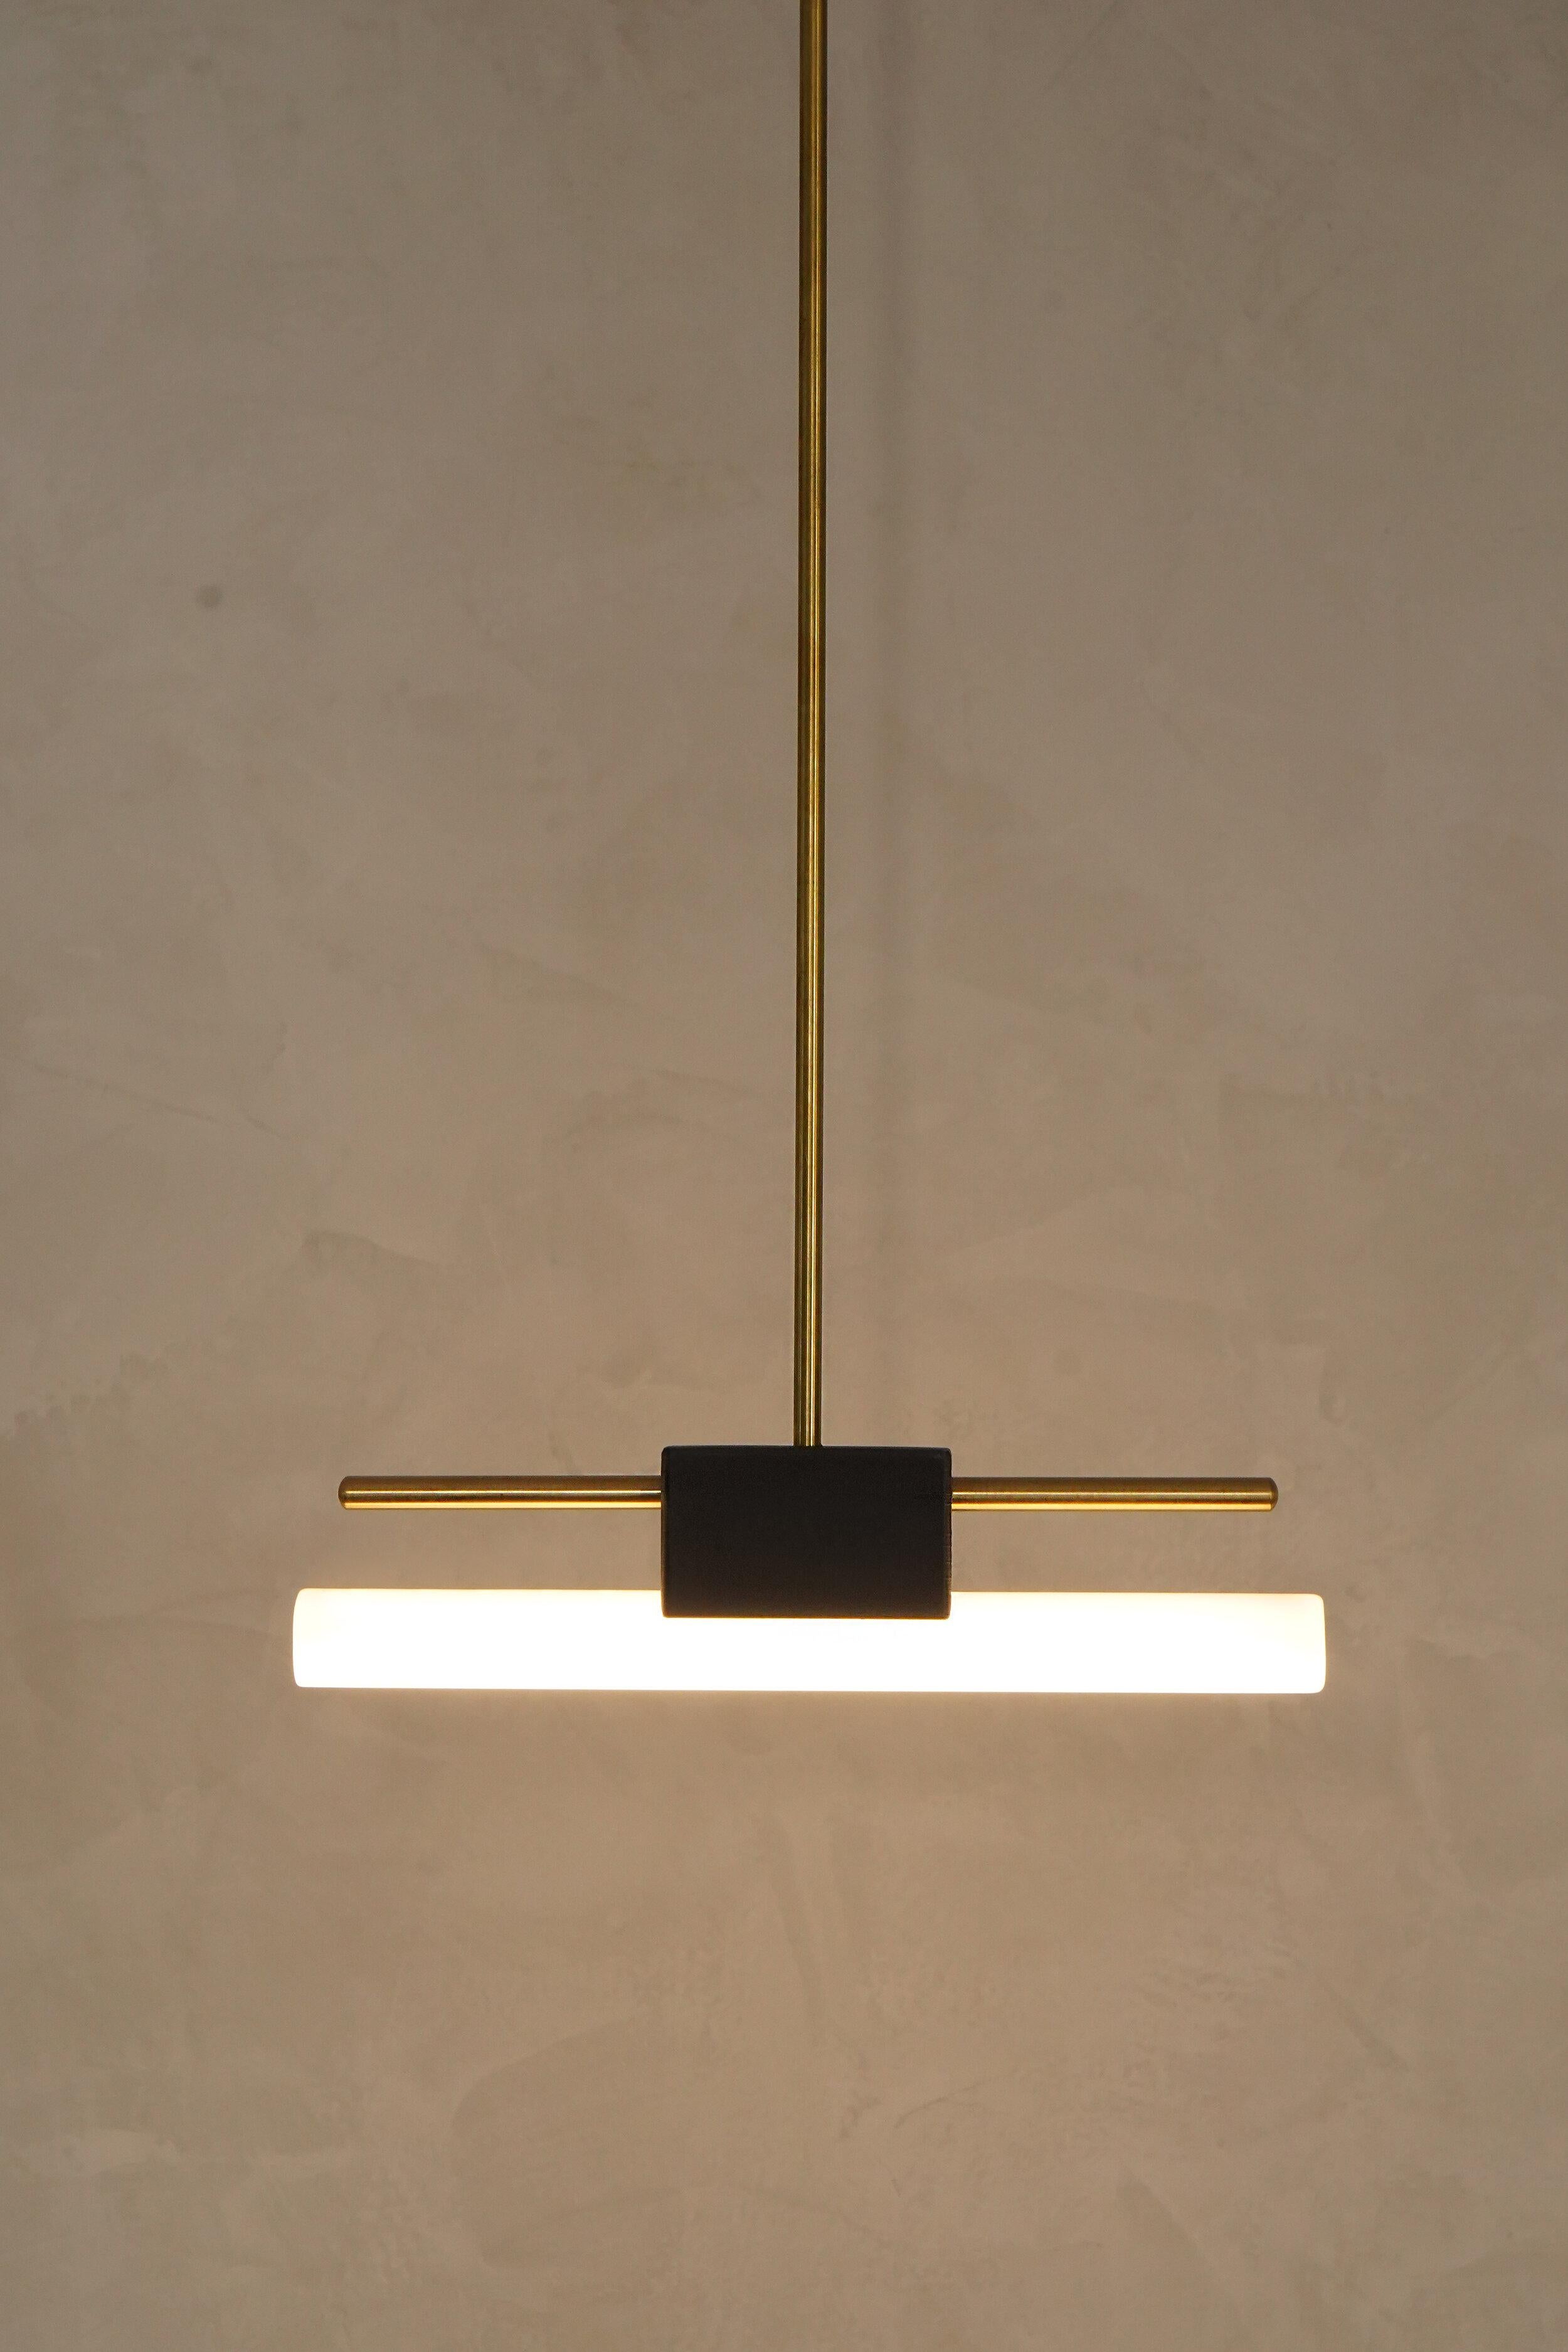 Tubus simple pendant by Contain
Dimensions: D50 x H100 (custom length) cm 
Materials: Brass and 3D printed PLA structure.
Available in different finishes.

All our lamps can be wired according to each country. If sold to the USA it will be